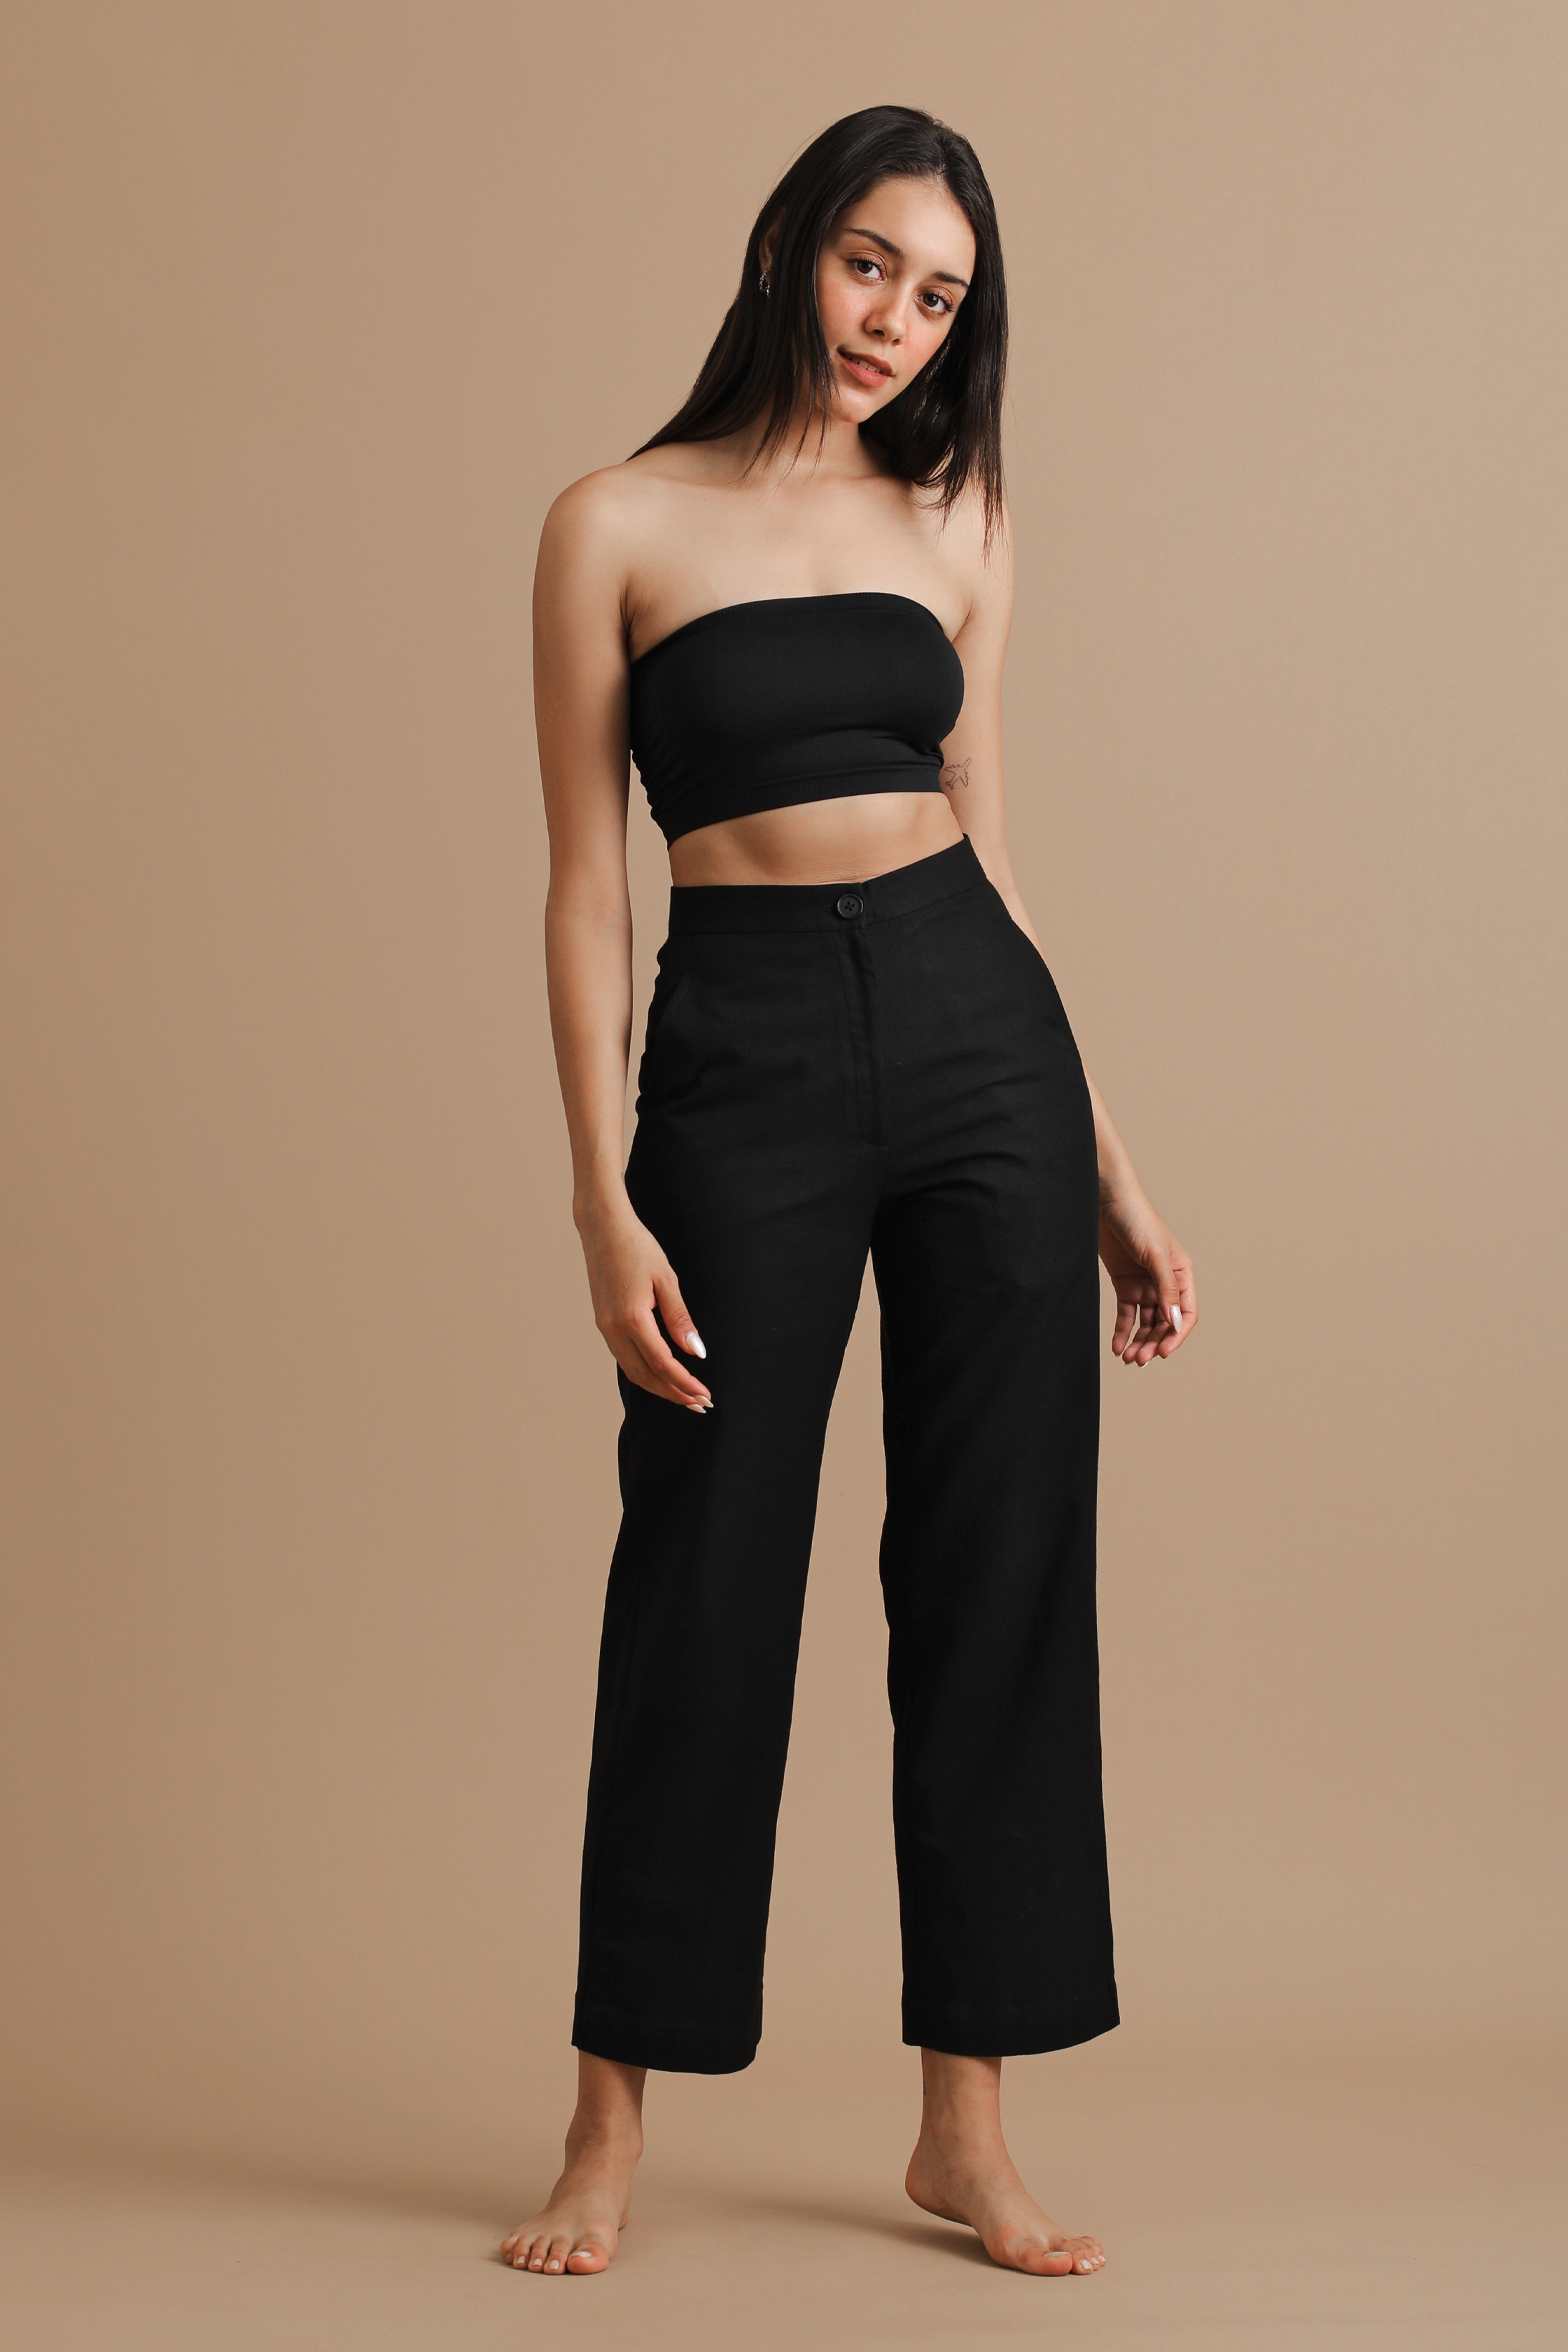 Plain Black Straight Pant For Girls at Rs 329/piece in Ludhiana | ID:  19359416162